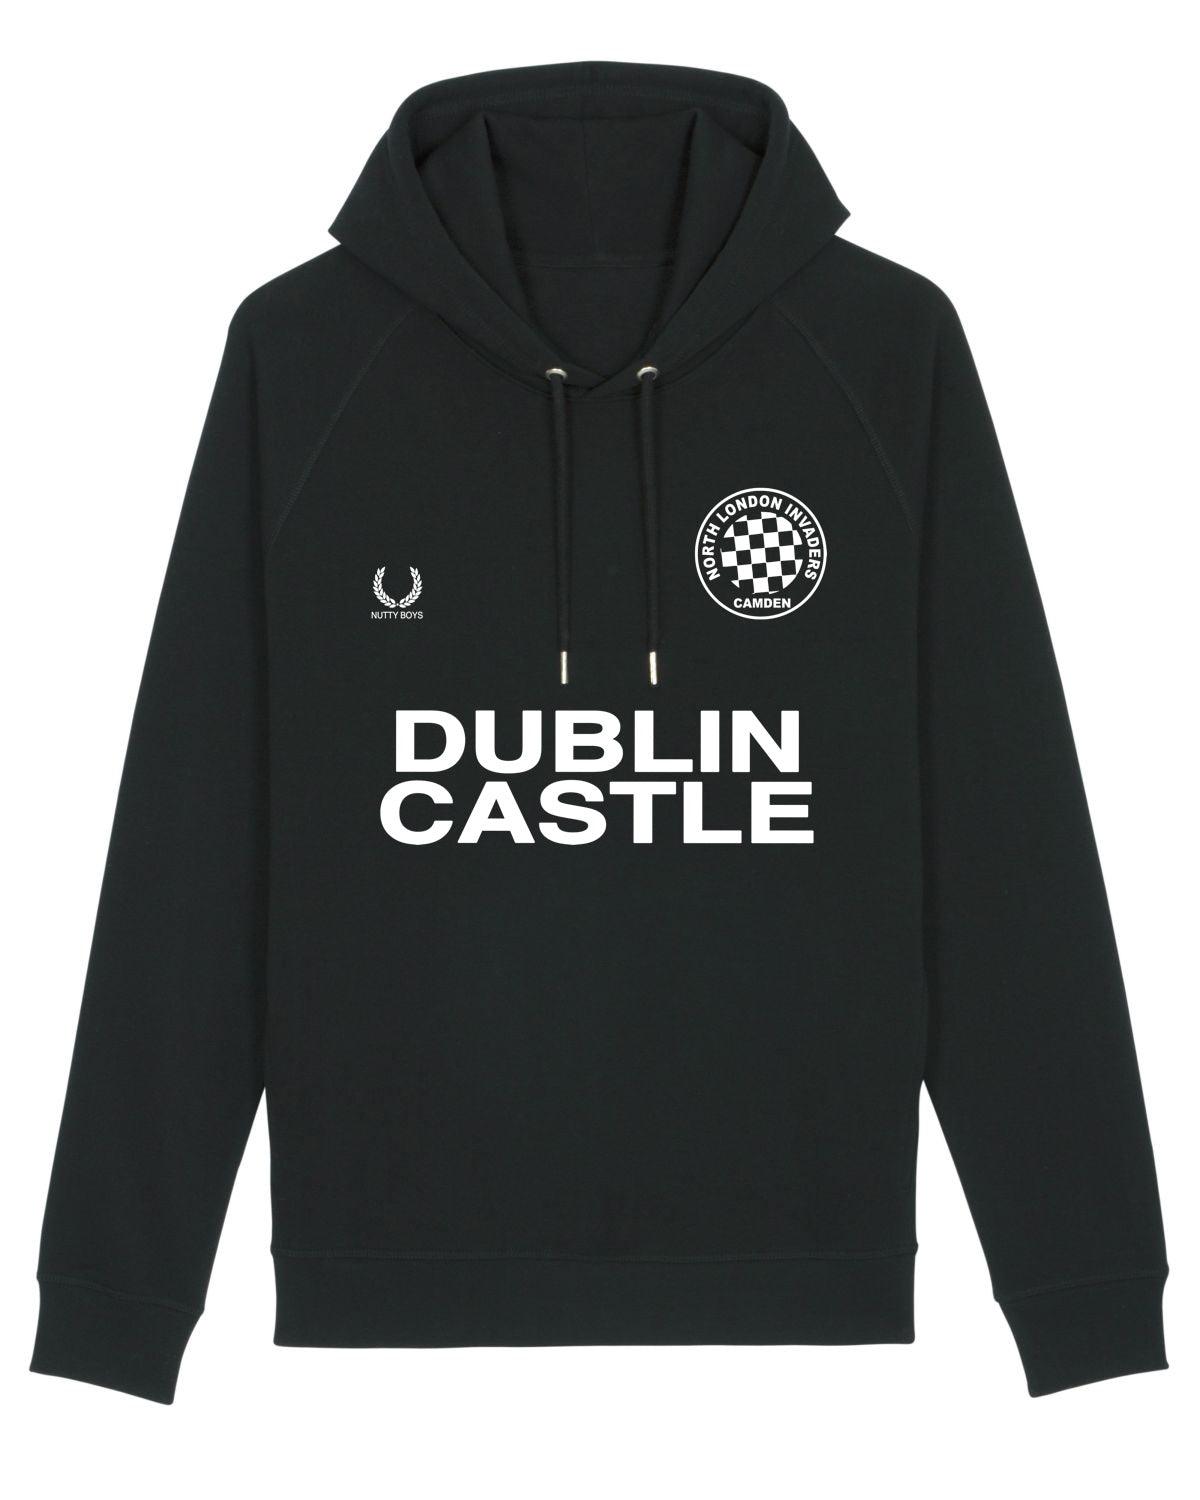 NORTH LONDON INVADERS : Premium Quality Hoodie Inspired by Madness & Football Shirts. Small to 4XL. Black - SOUND IS COLOUR